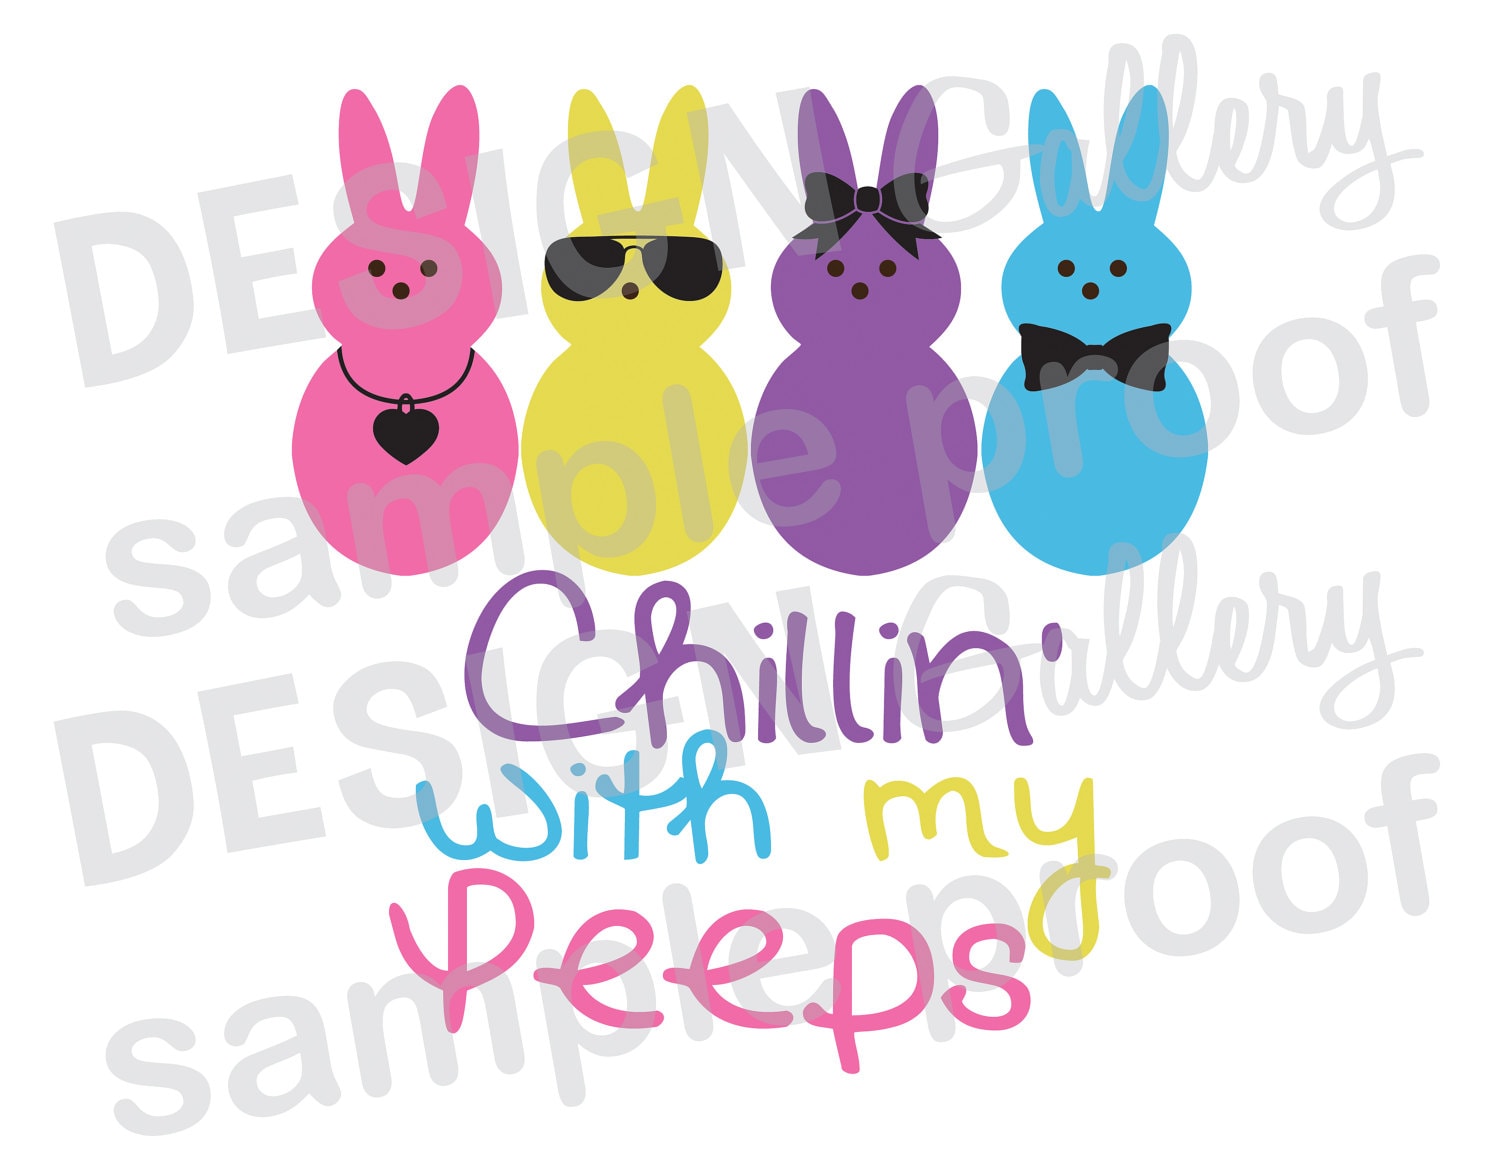 Chillin' with my Peeps SVG DXF cut & JPG png image